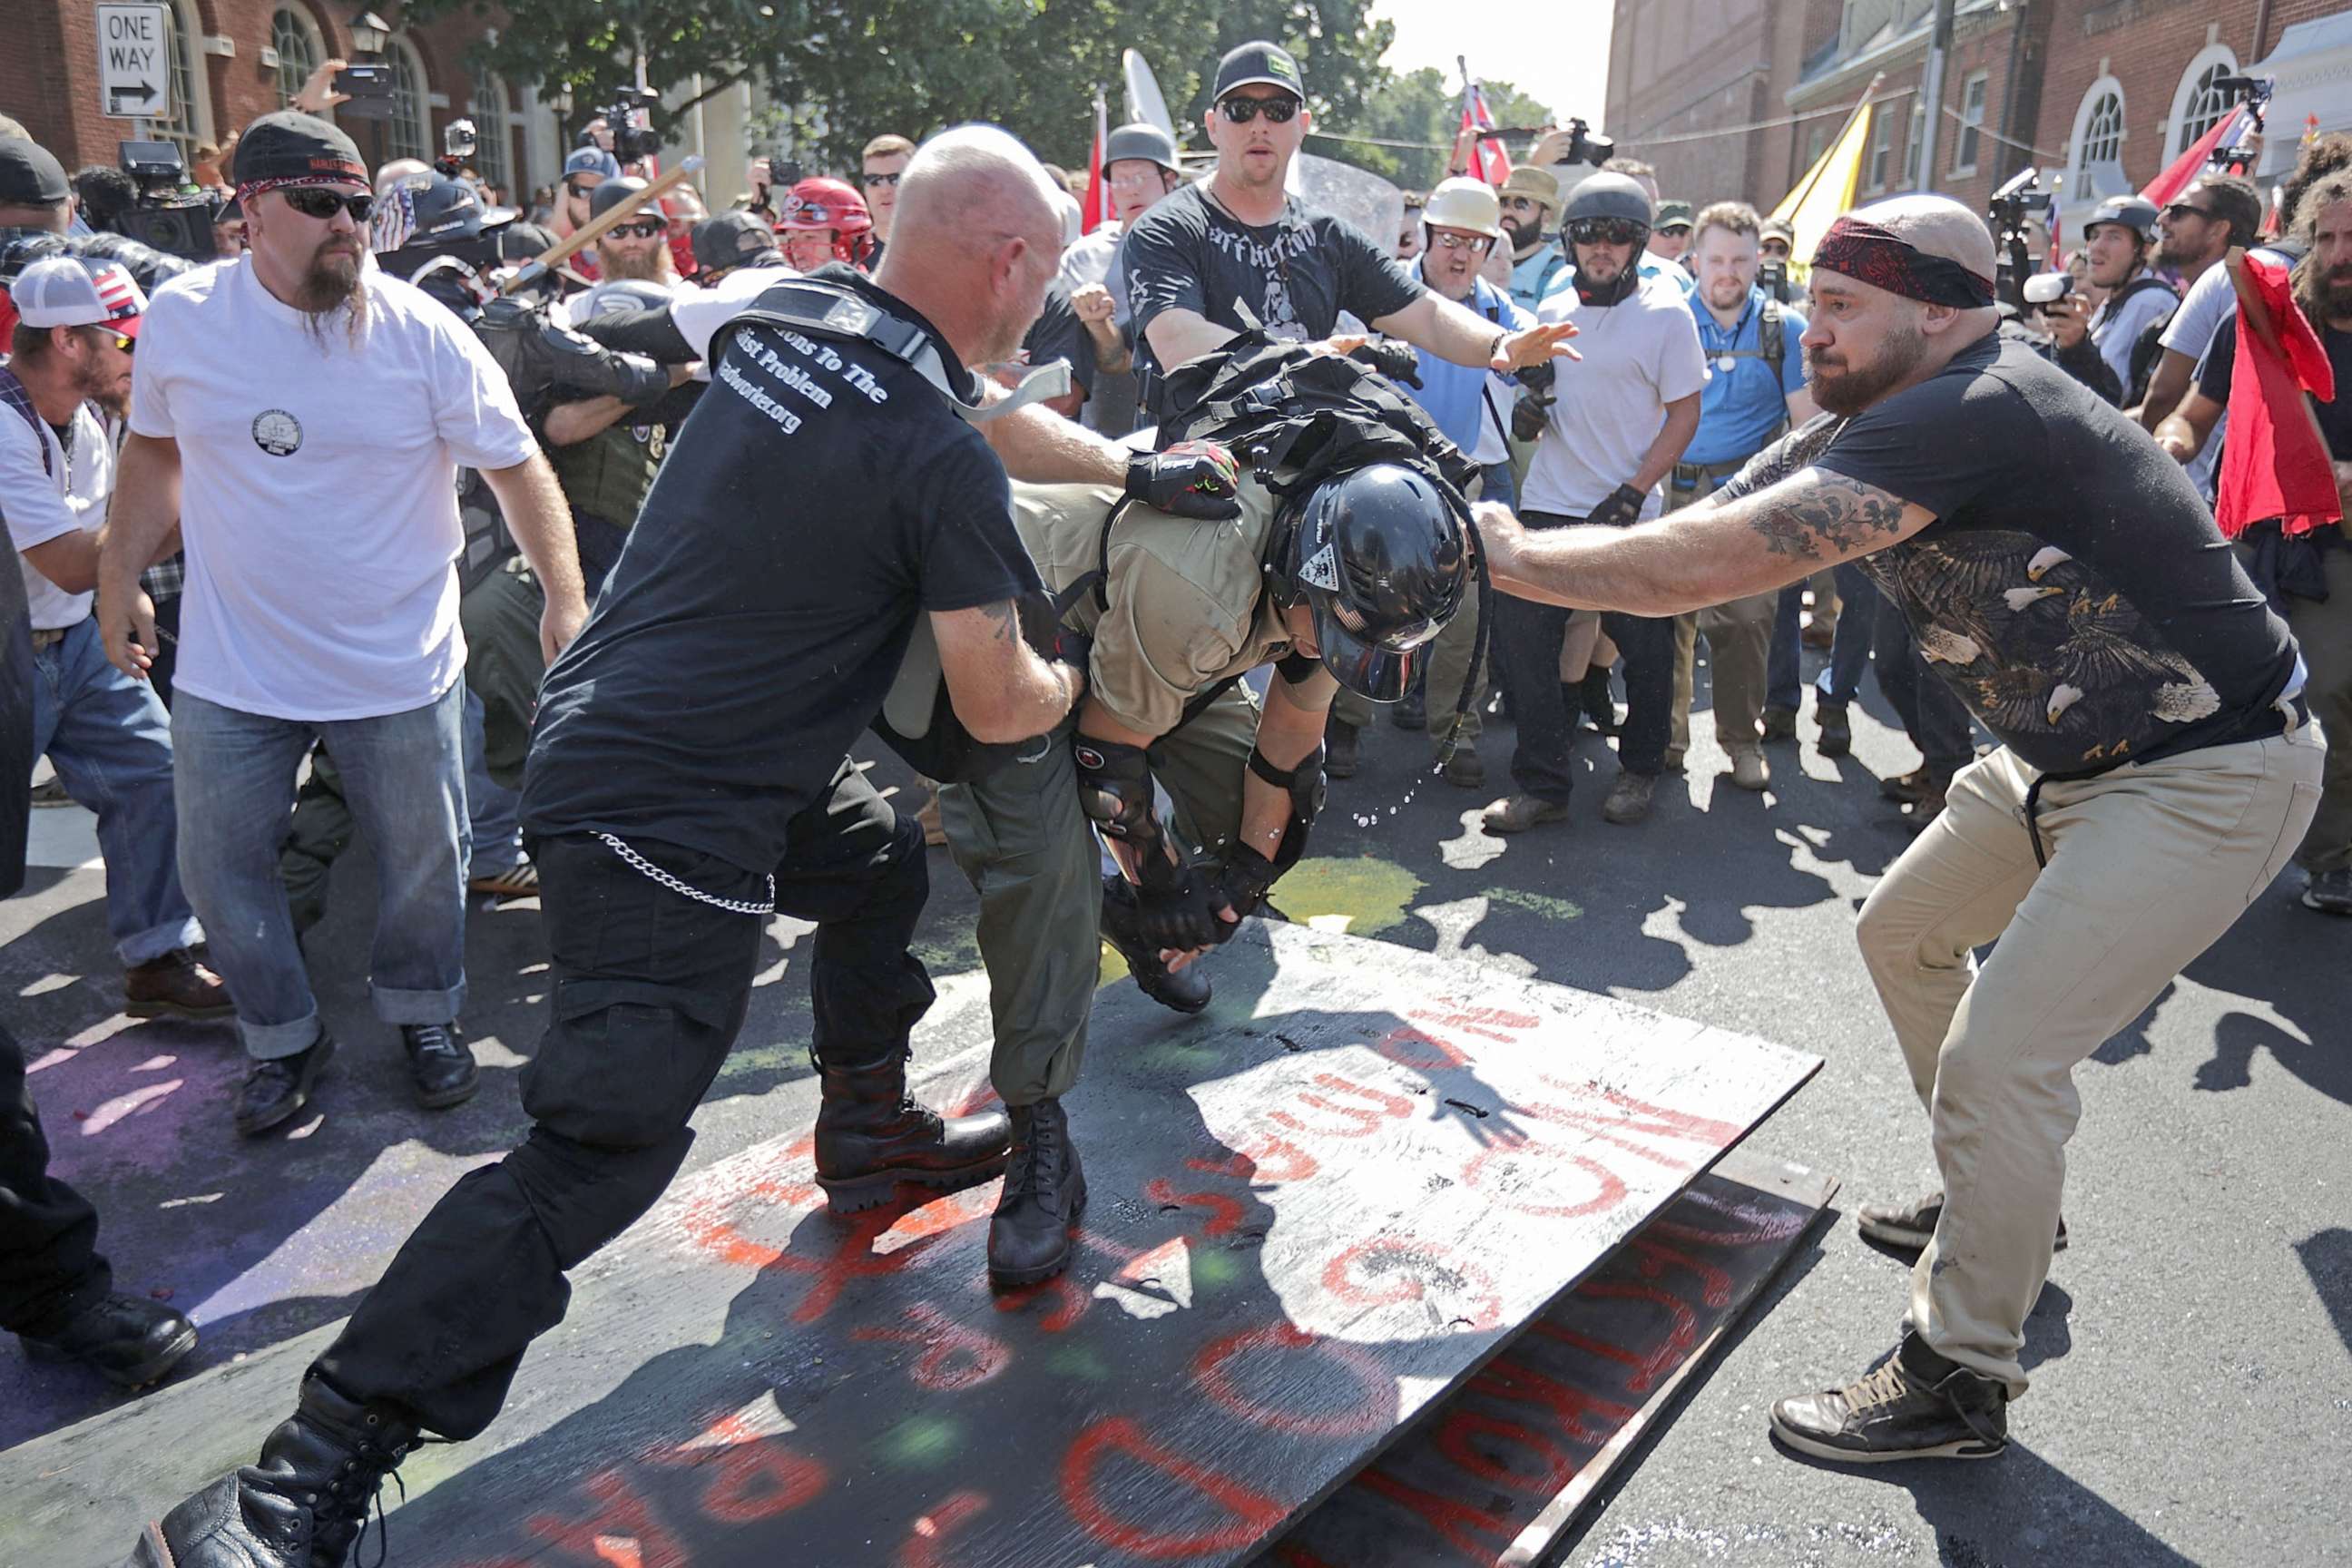 PHOTO: White nationalists, neo-Nazis, the KKK and members of the "alt-right" attack each other as a counter protester (R) intervenes during the melee outside Emancipation Park during the Unite the Right rally, Aug. 12, 2017, in Charlottesville, Va.